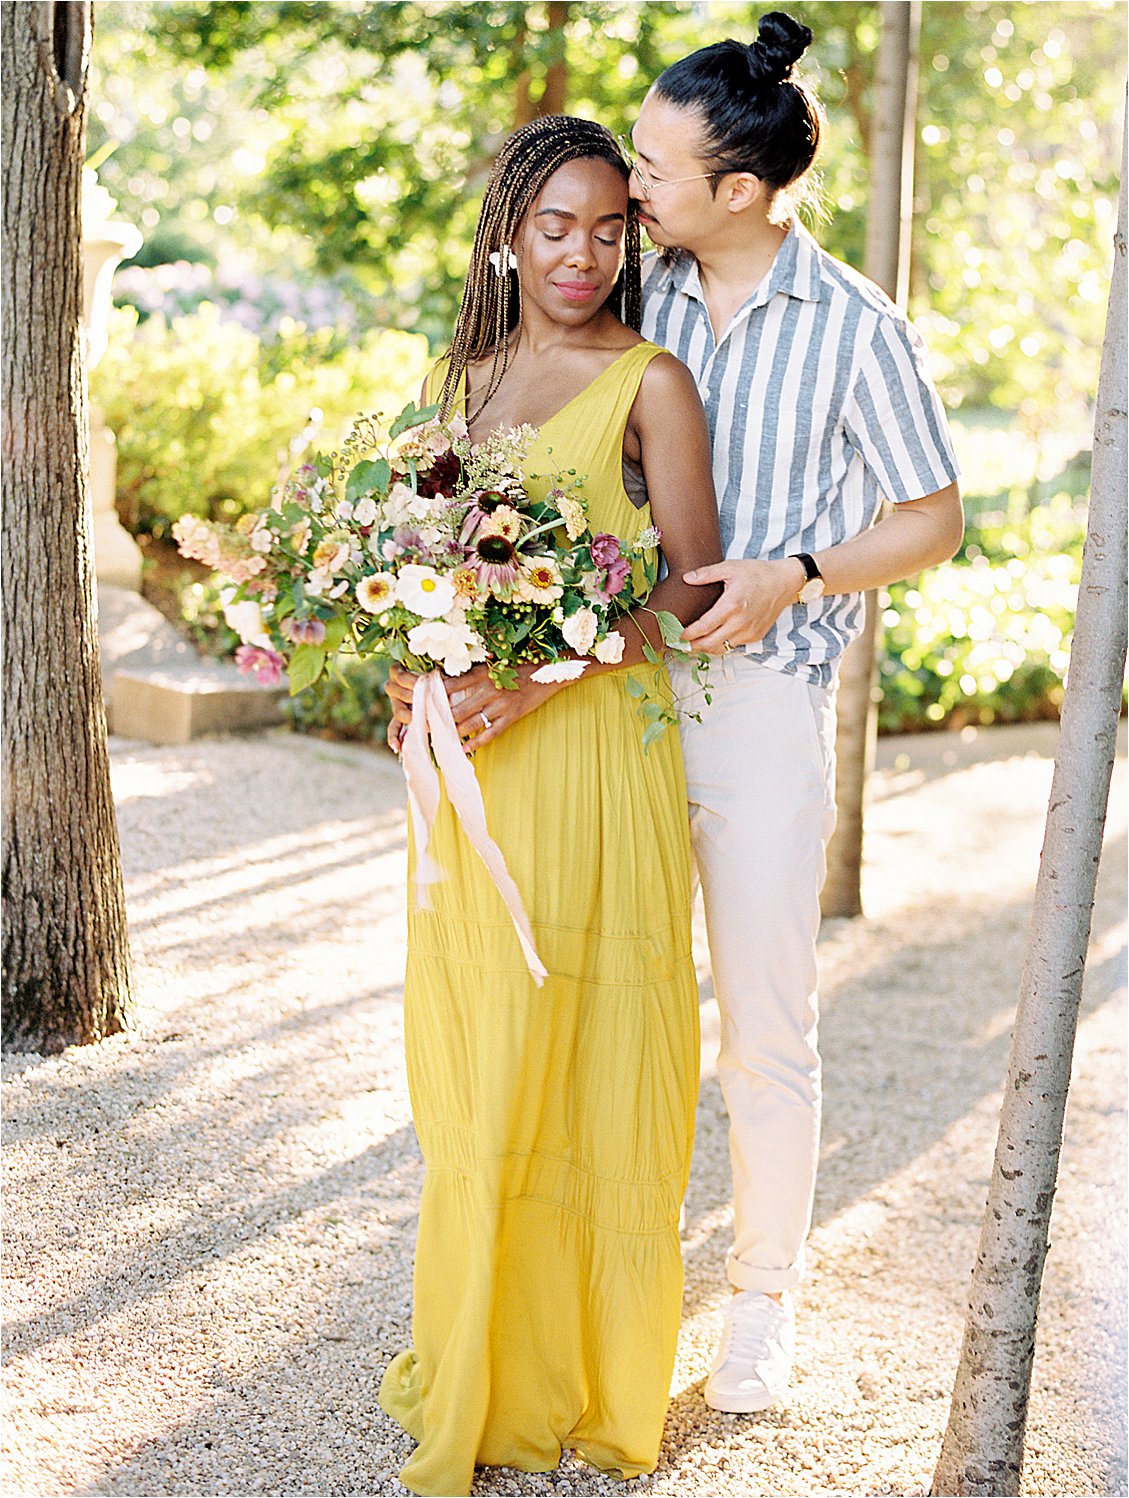 Summer Meridian House Anniversary Session with DC + Destination Film Wedding Photographer, Renee Hollingshead